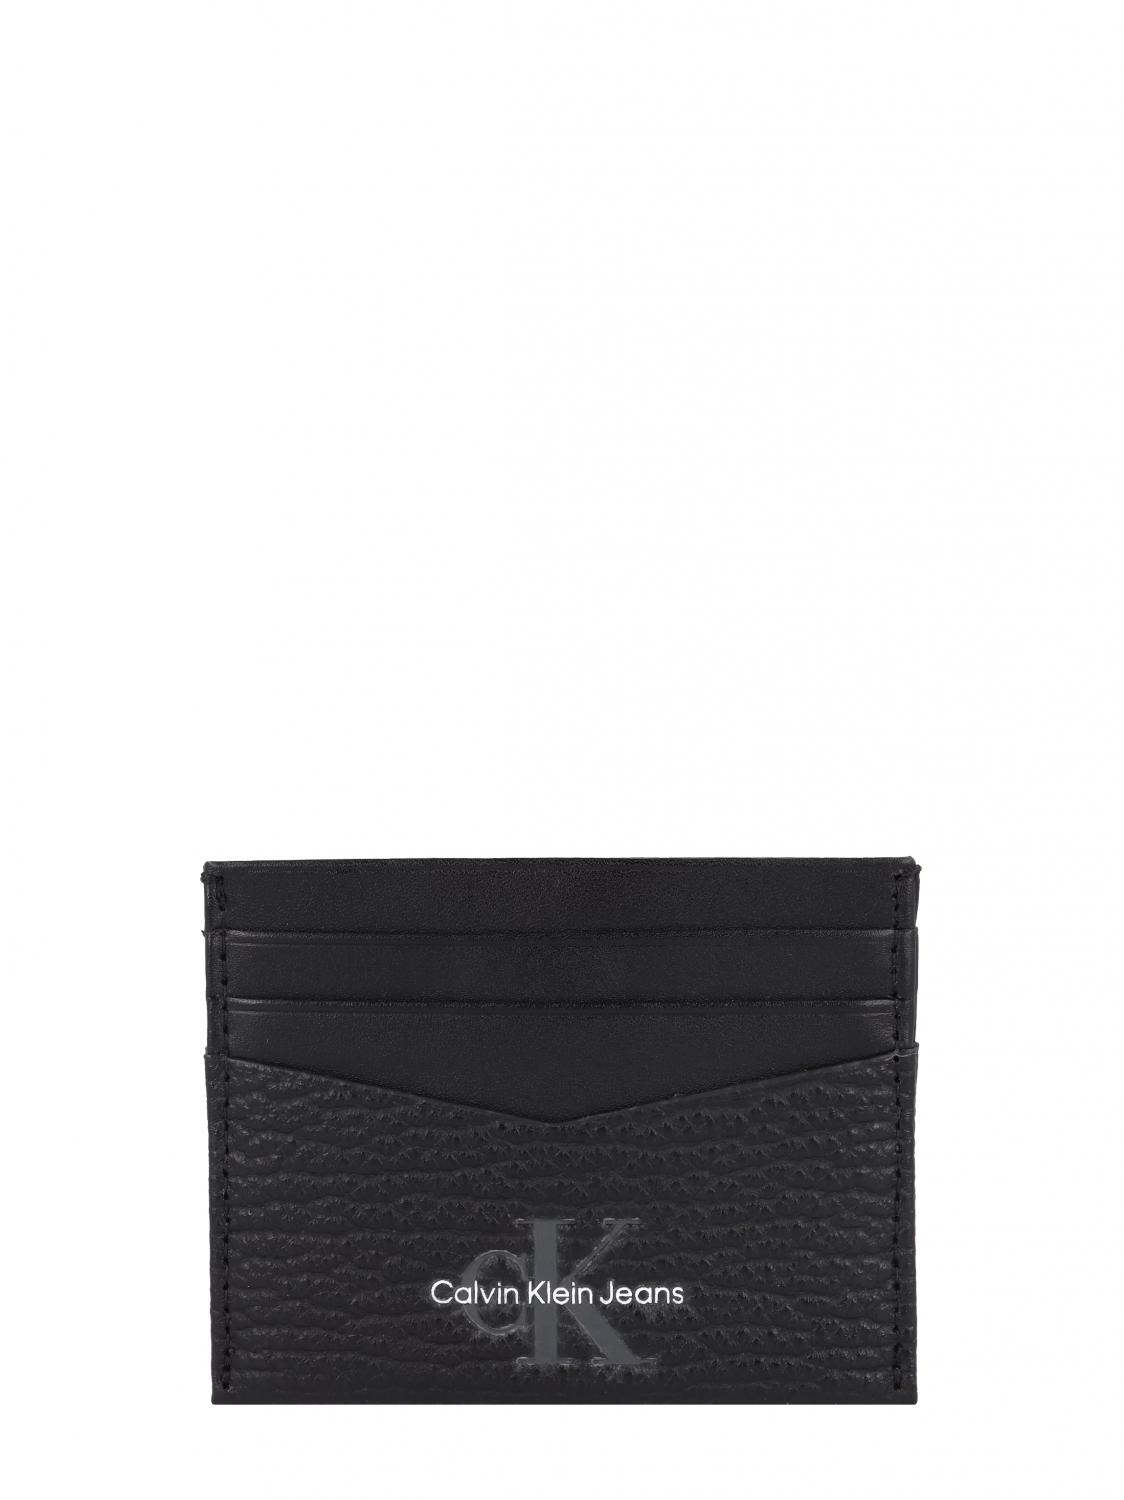 Calvin Klein Ck Jeans Mono Textured Leather Card Holder Black - Buy At  Outlet Prices!